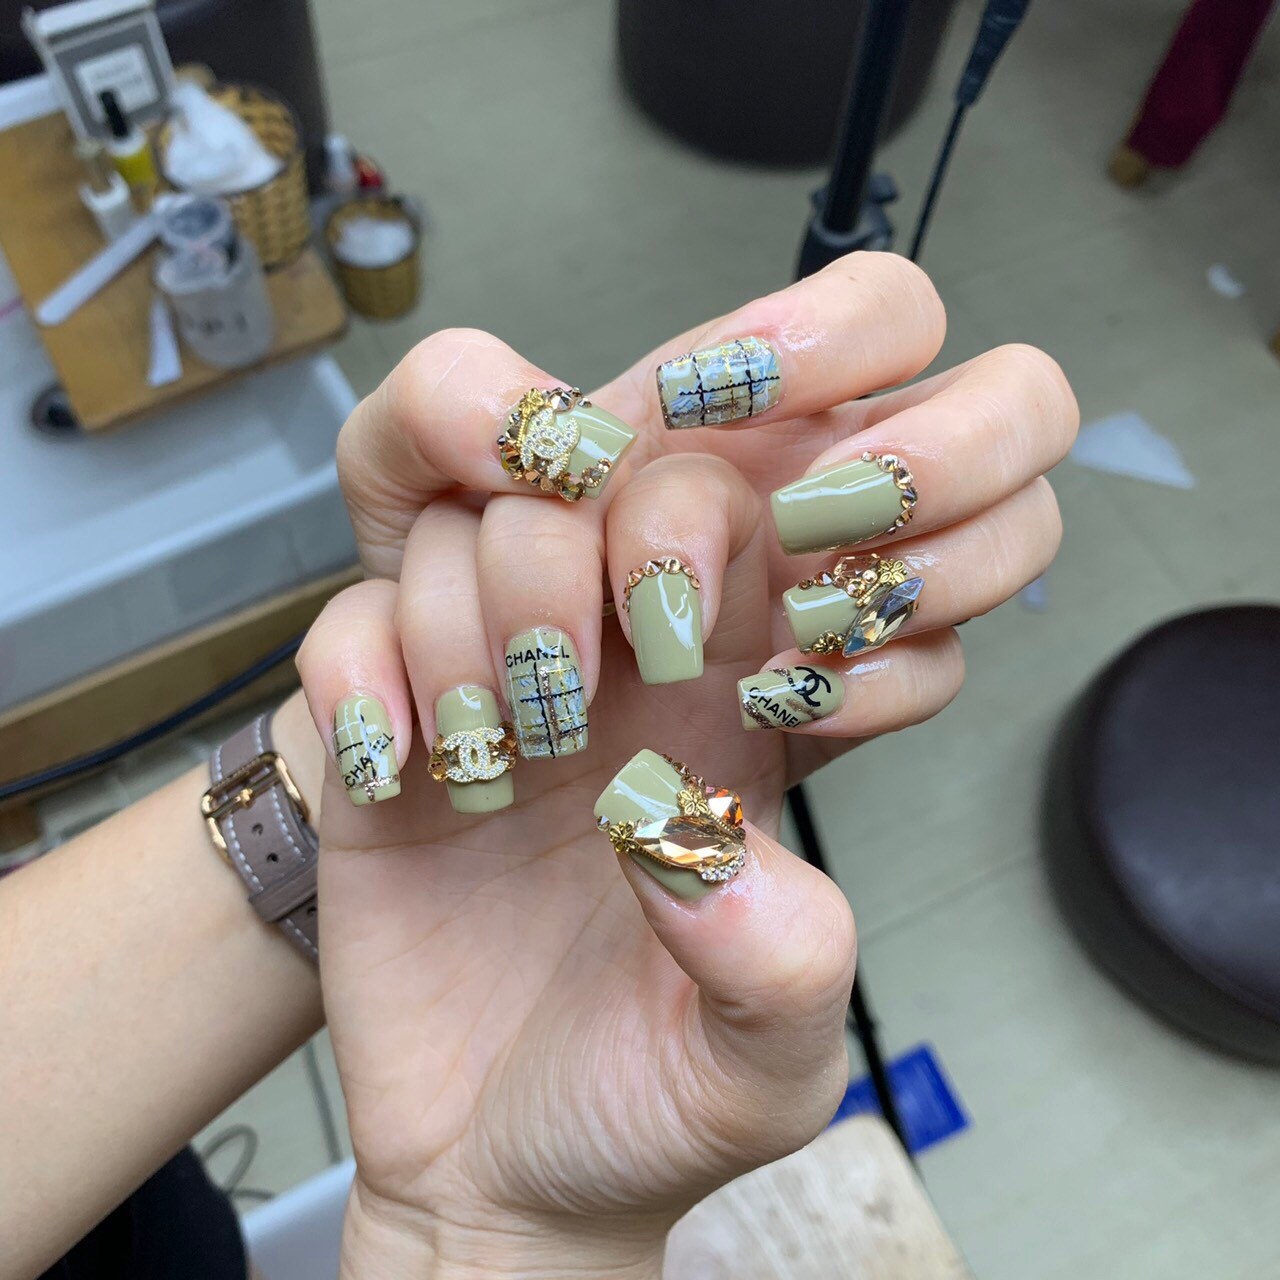 Her Beauty Nail